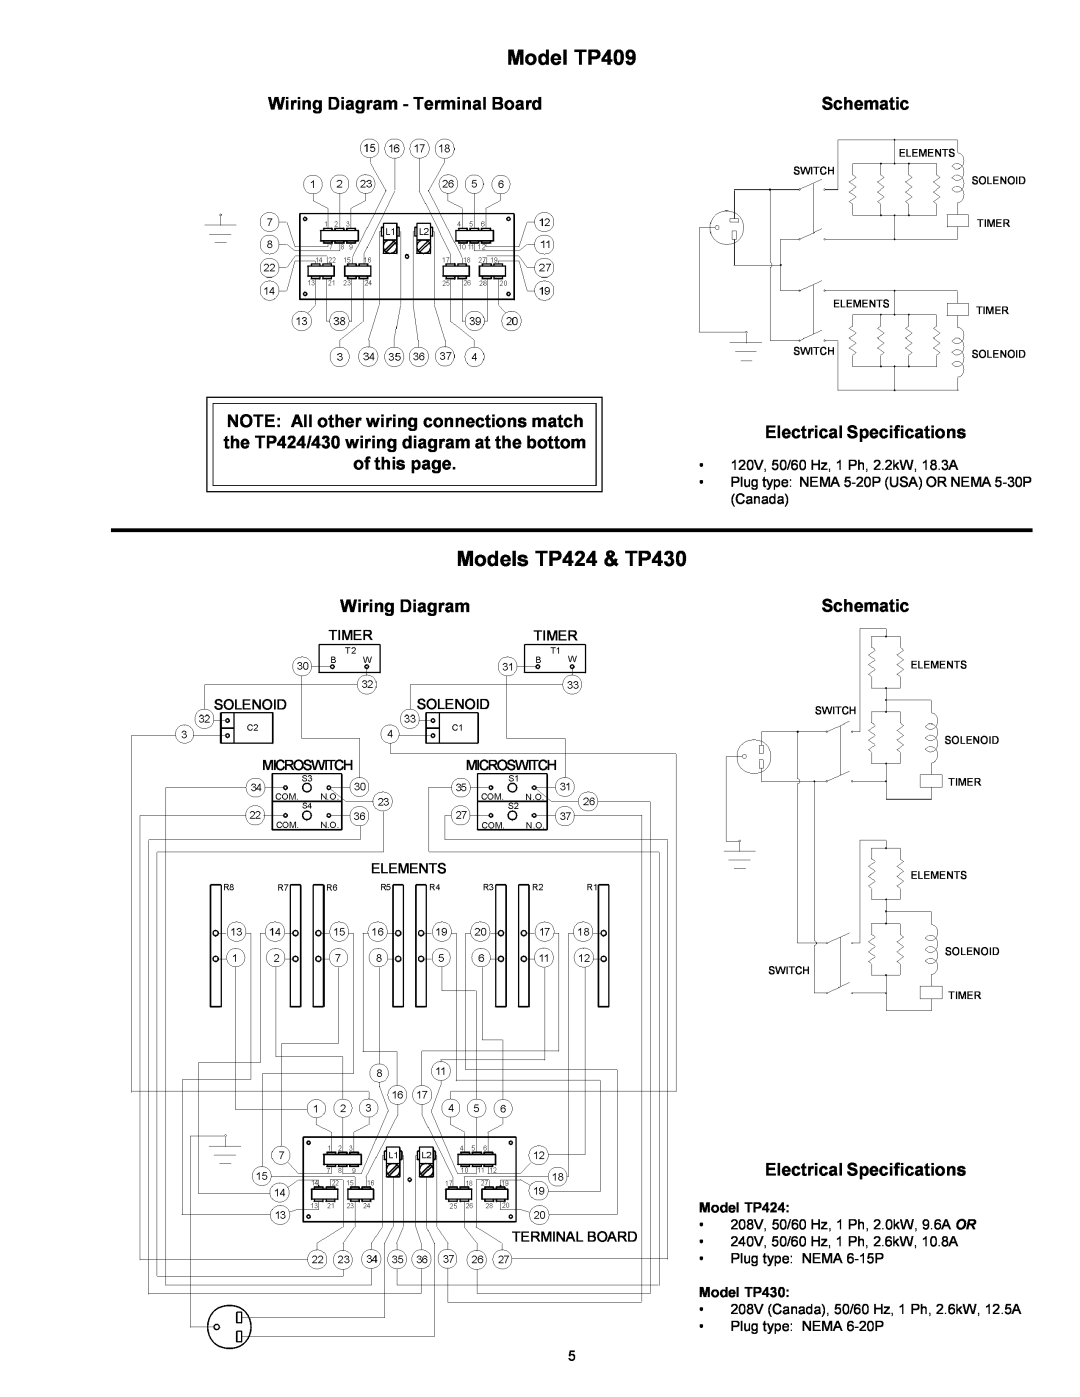 Toastmaster BTW24 Model TP409, Models TP424 & TP430, Schematic, Wiring Diagram - Terminal Board, Electrical Specifications 